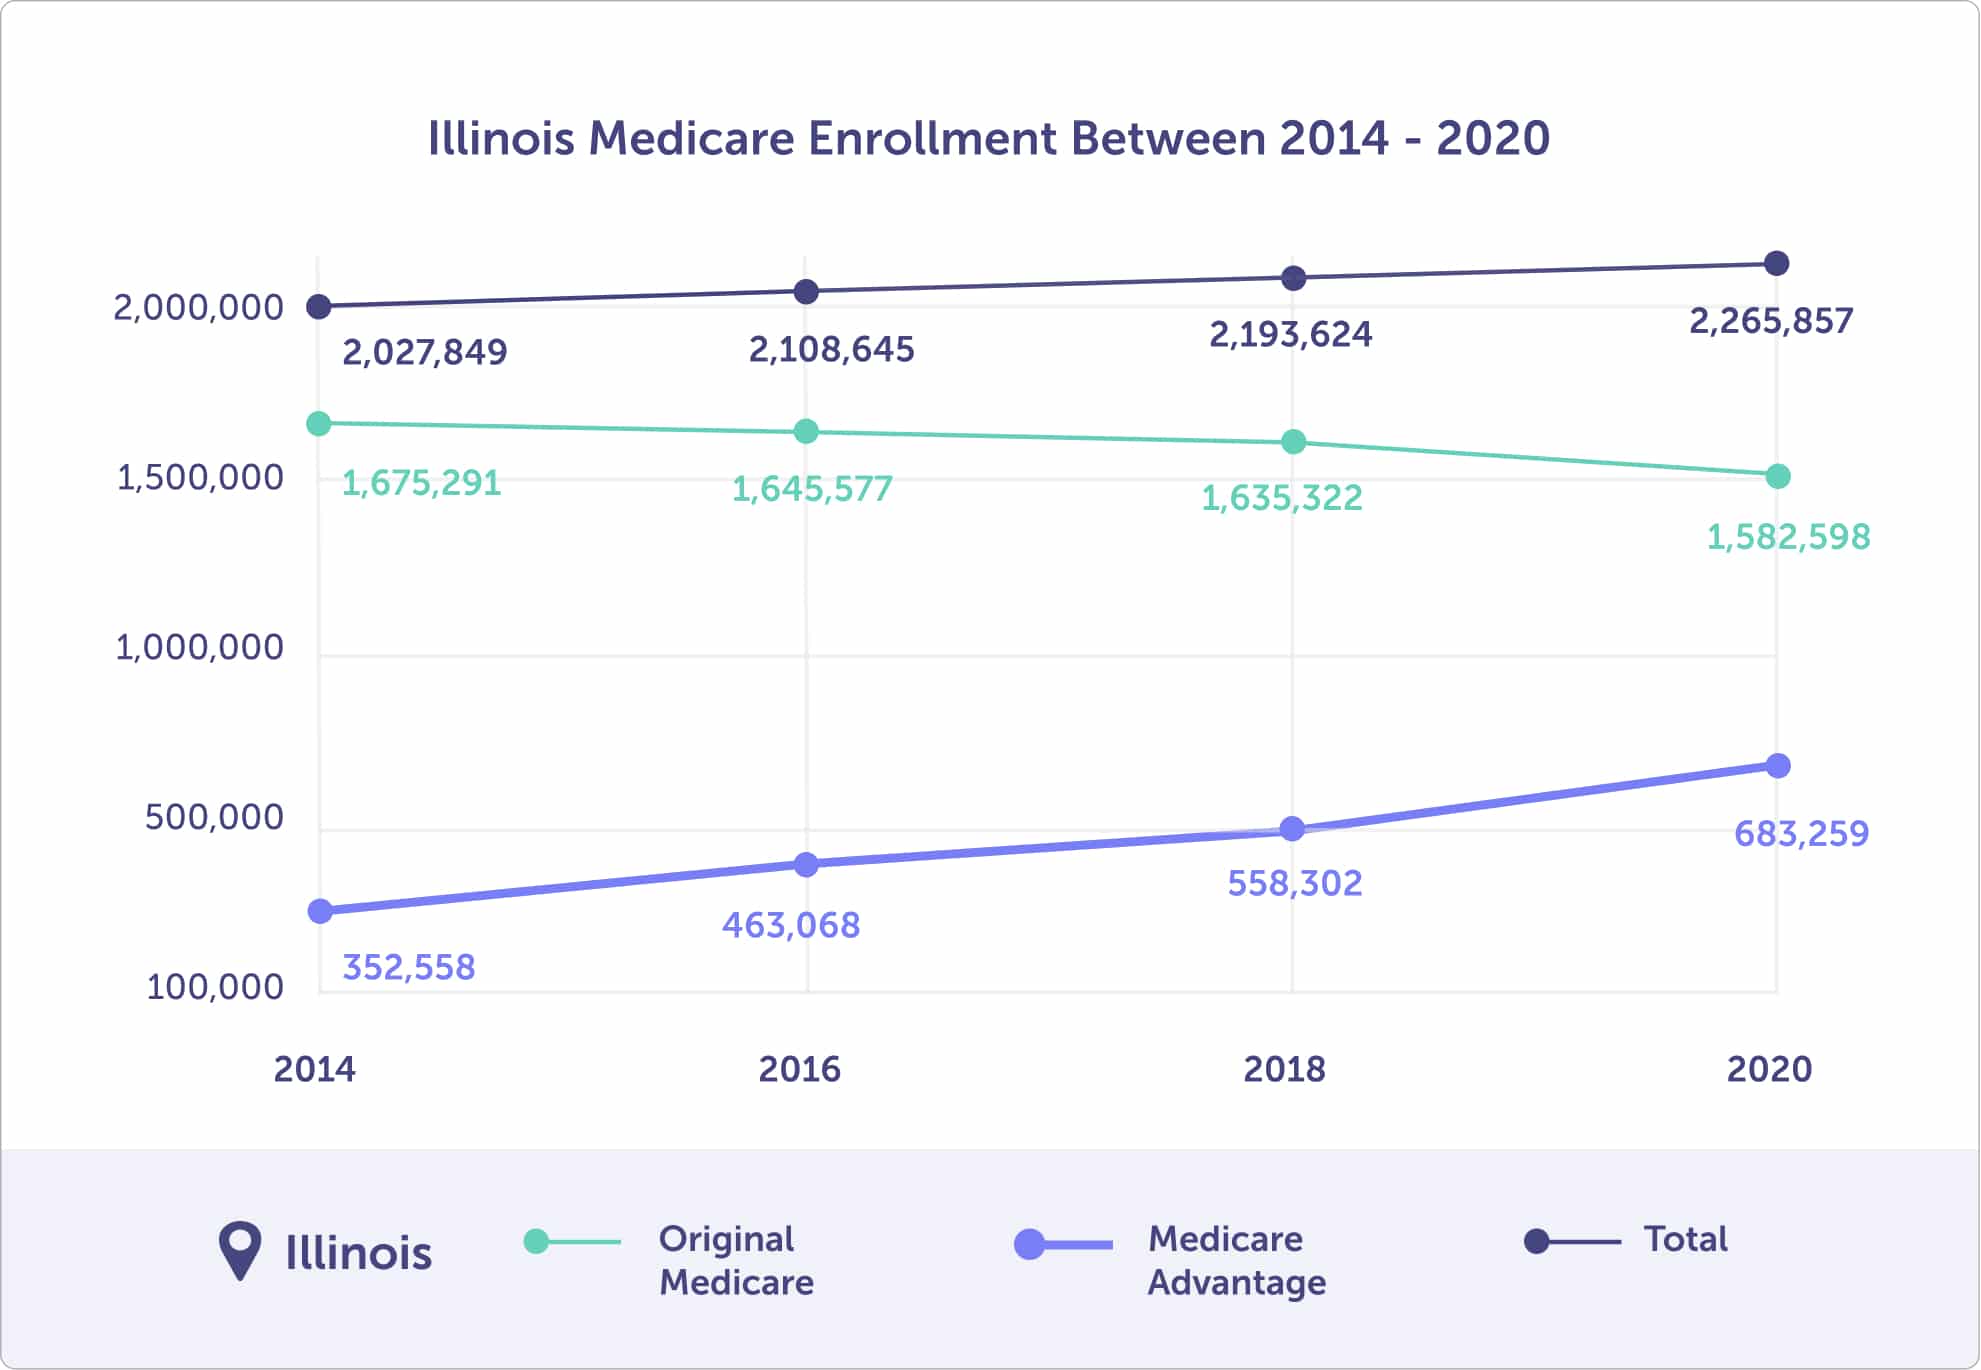 Illinois Medicare enrollment between 2014 and 2020